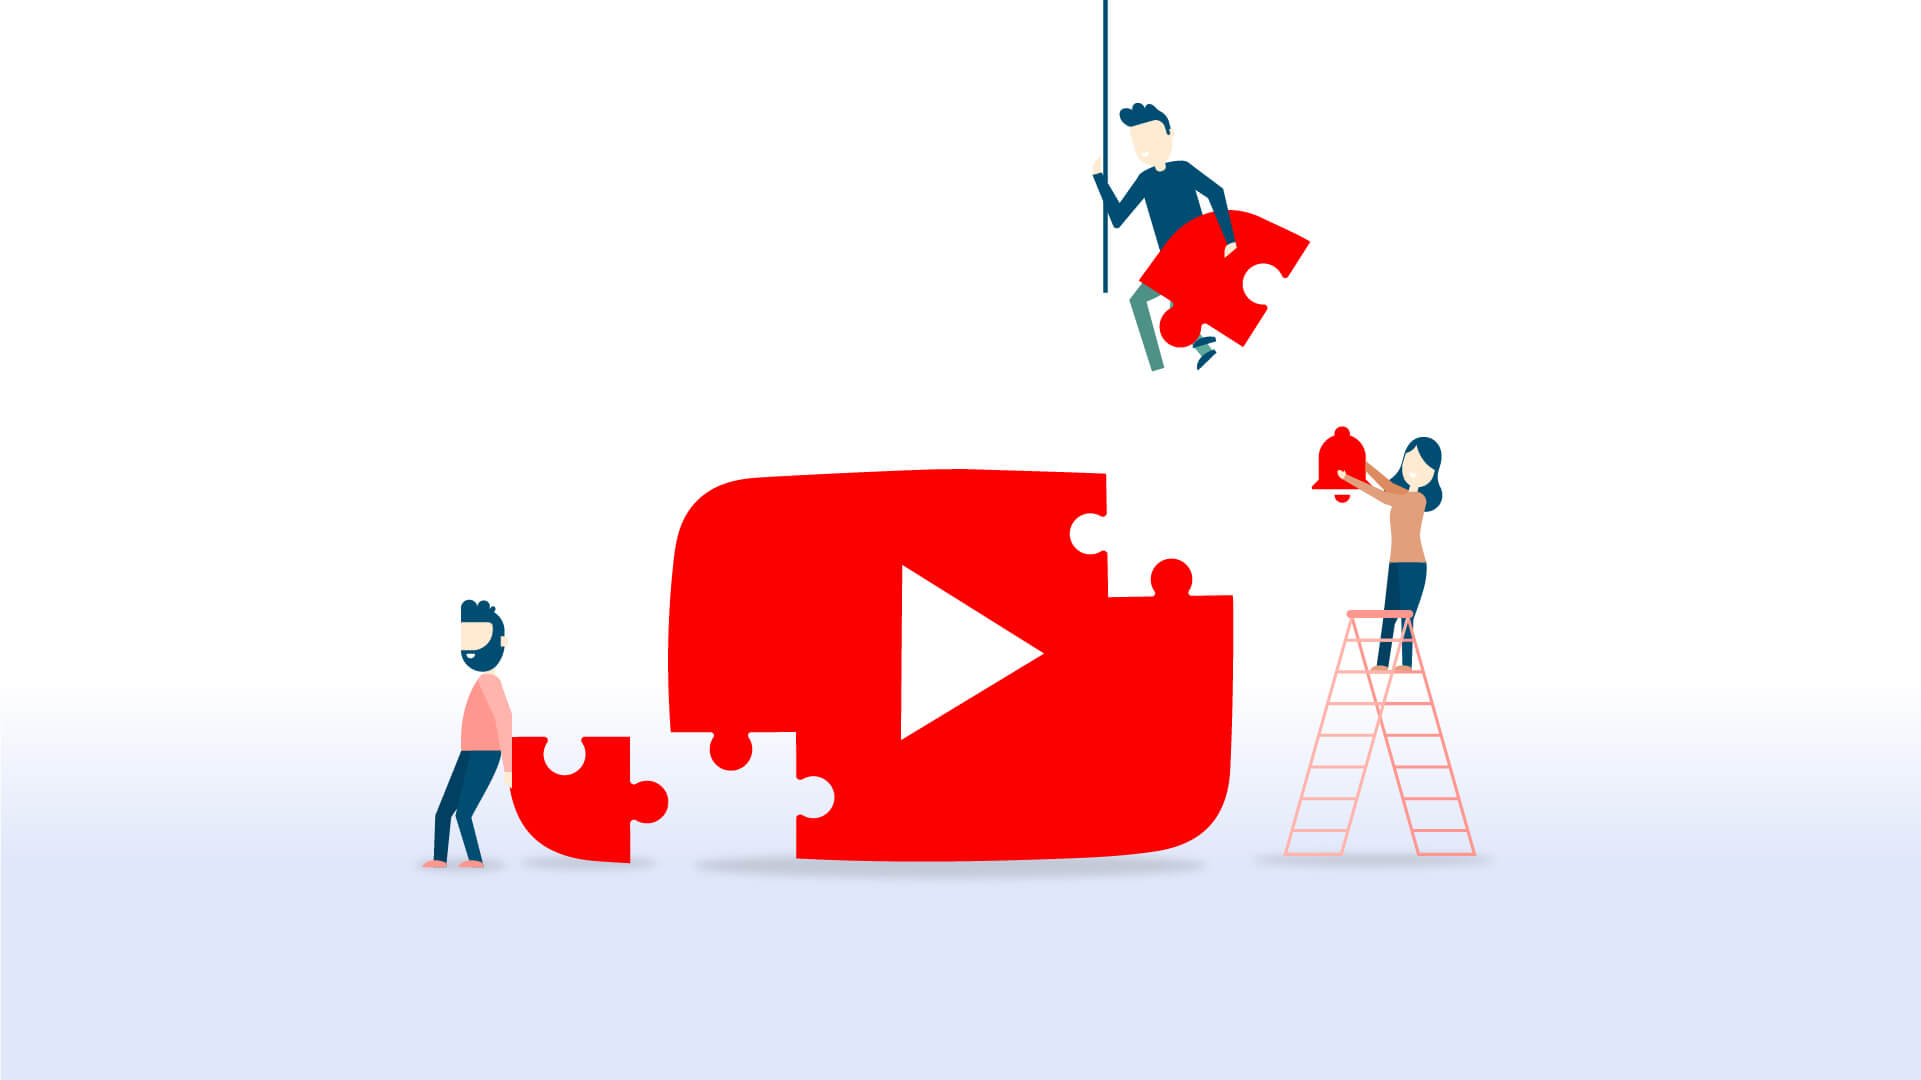 Follow these 9 Steps to build a successful YouTube brand